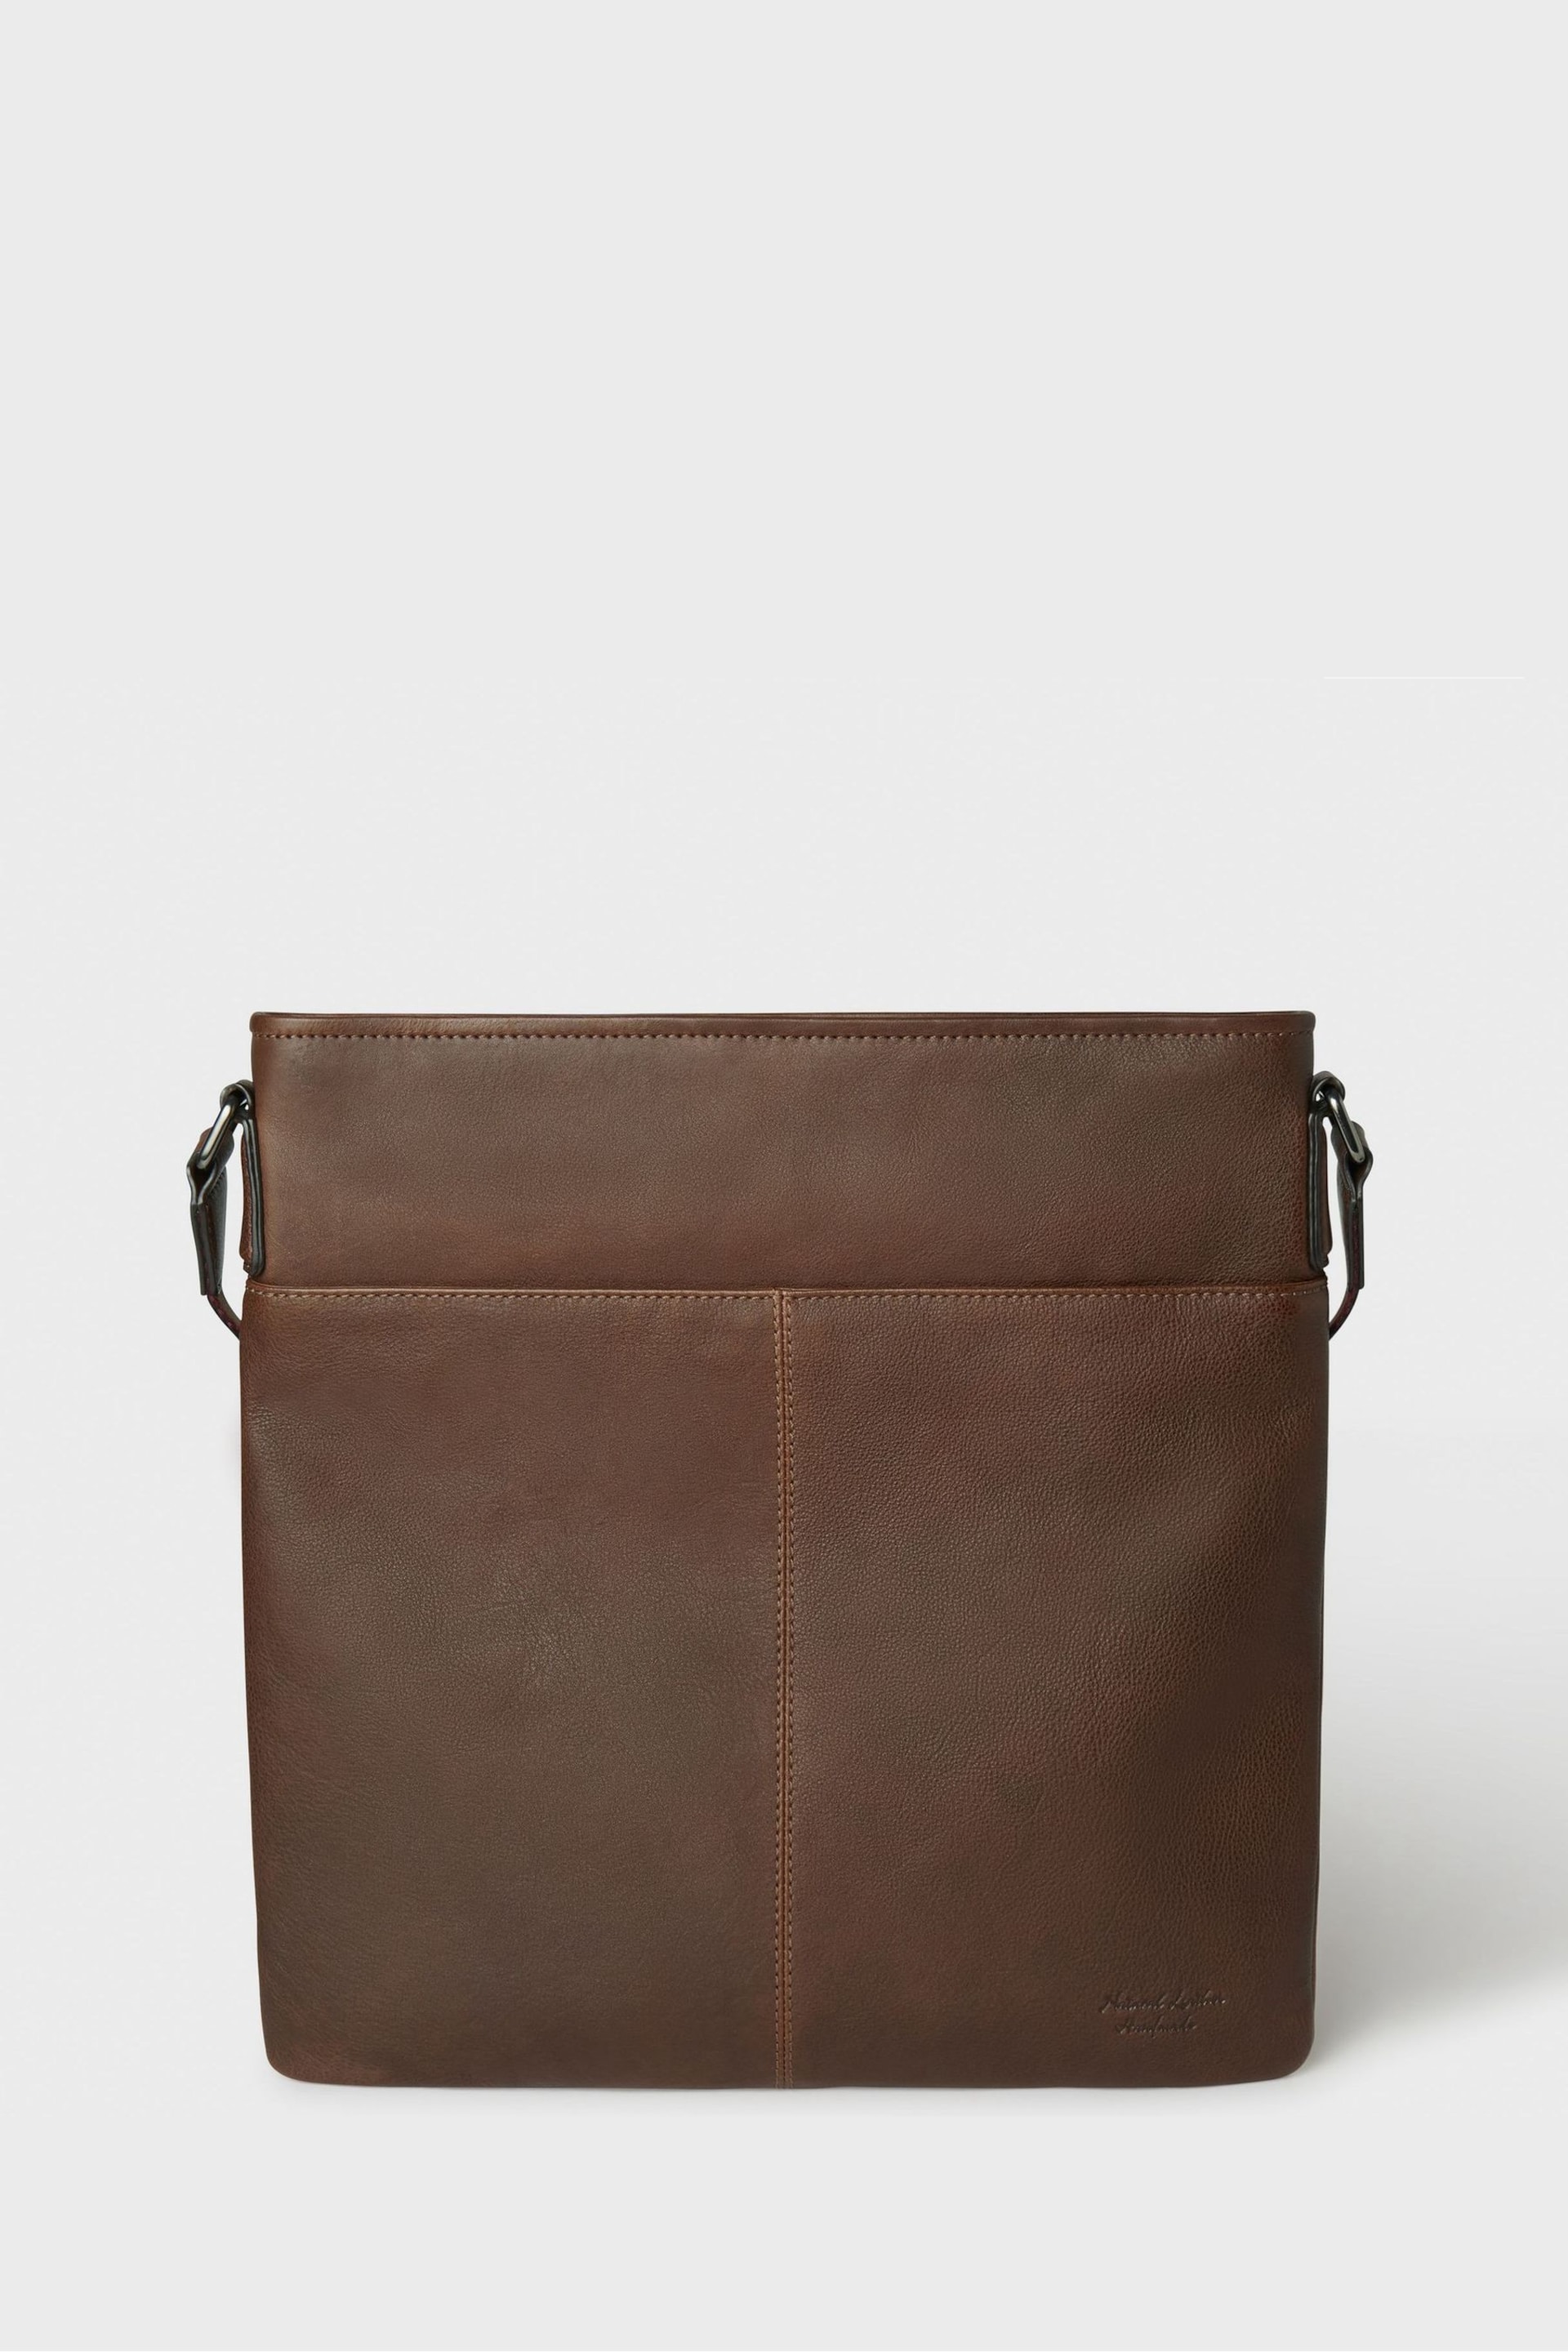 Osprey London The Compass Leather Cross-Body Brown Bag - Image 2 of 5